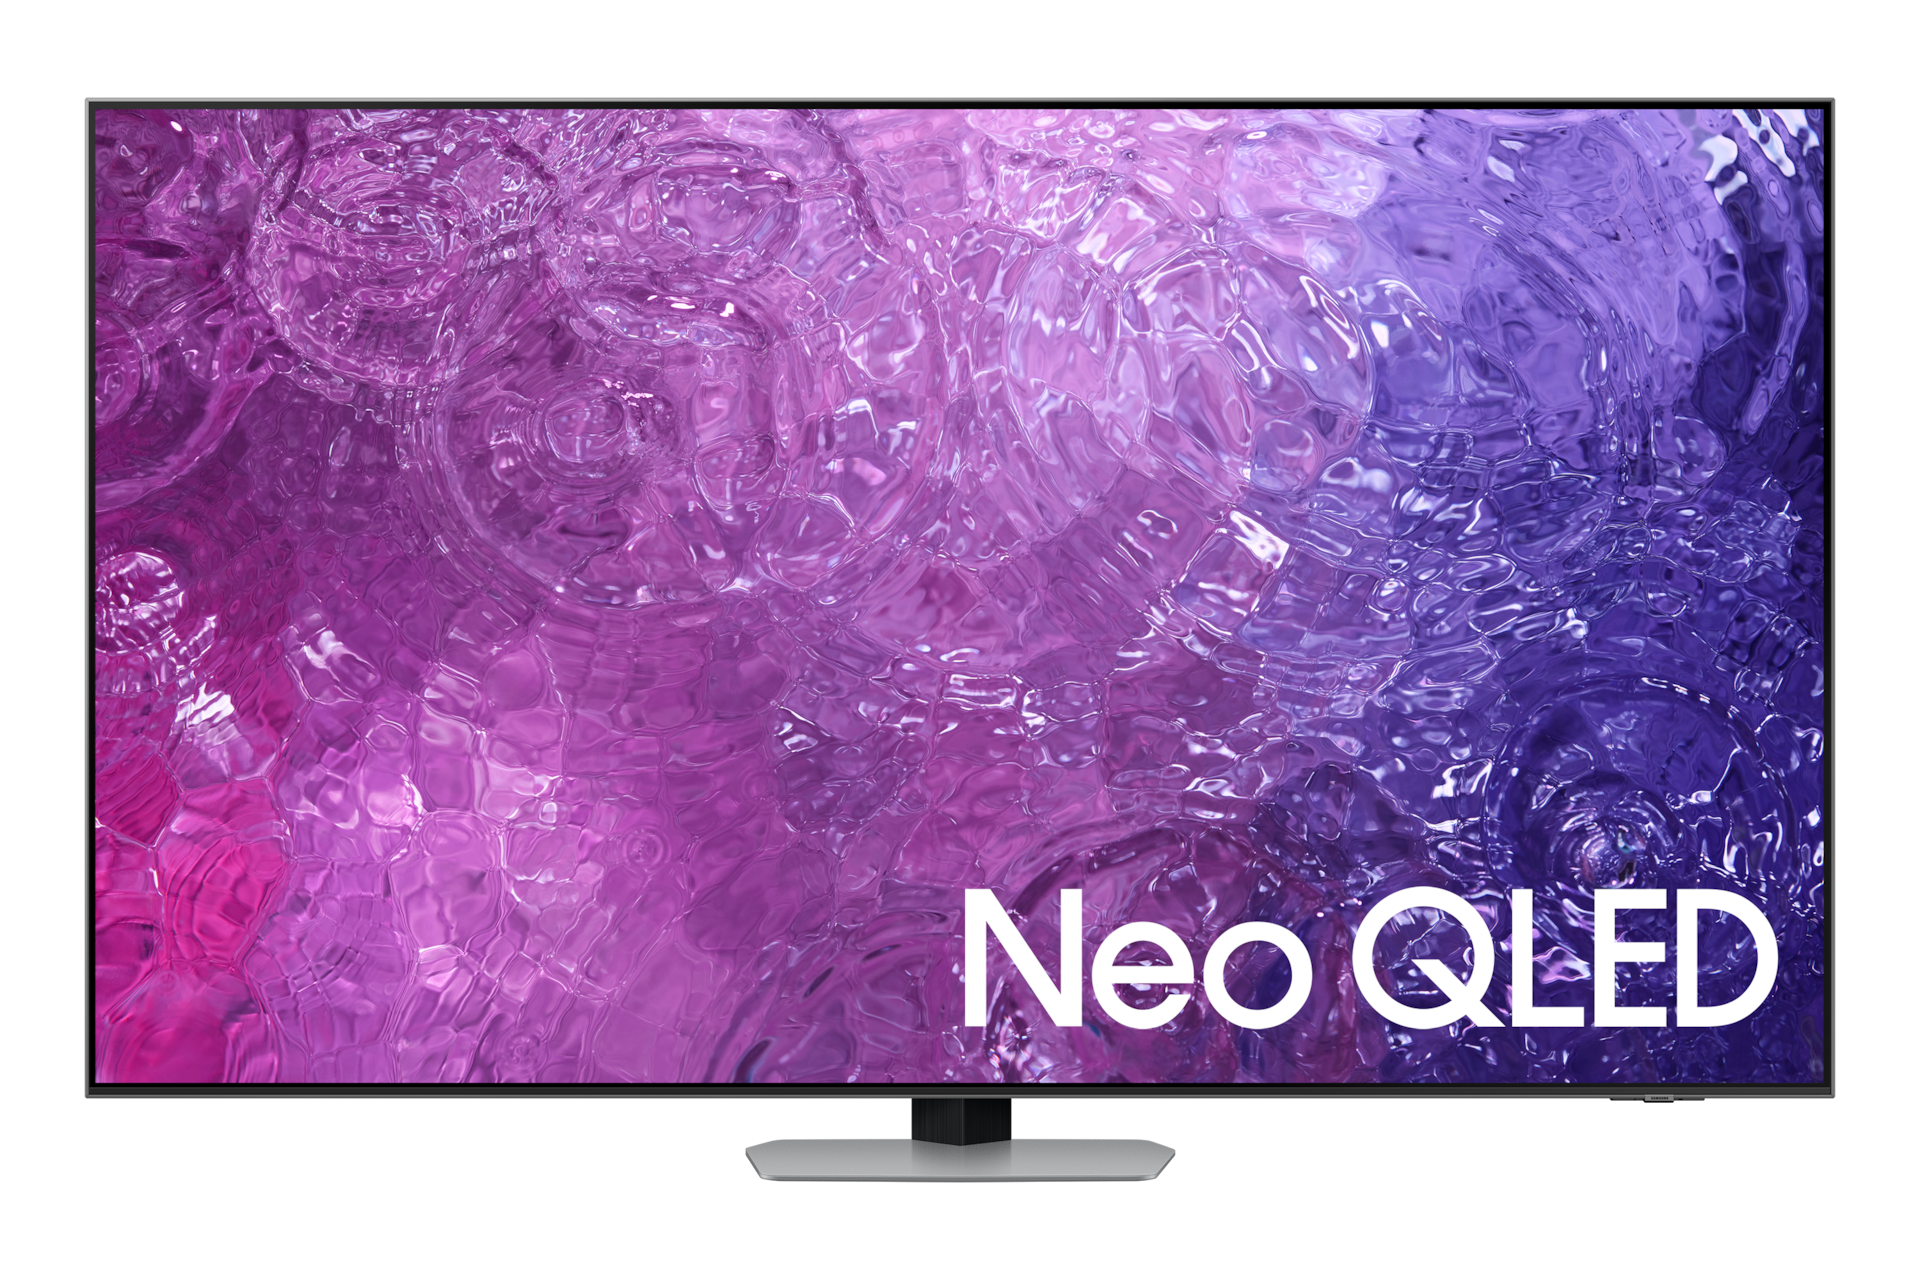 Samsung's new 98-inch 8K QLED TV costs more than many cars